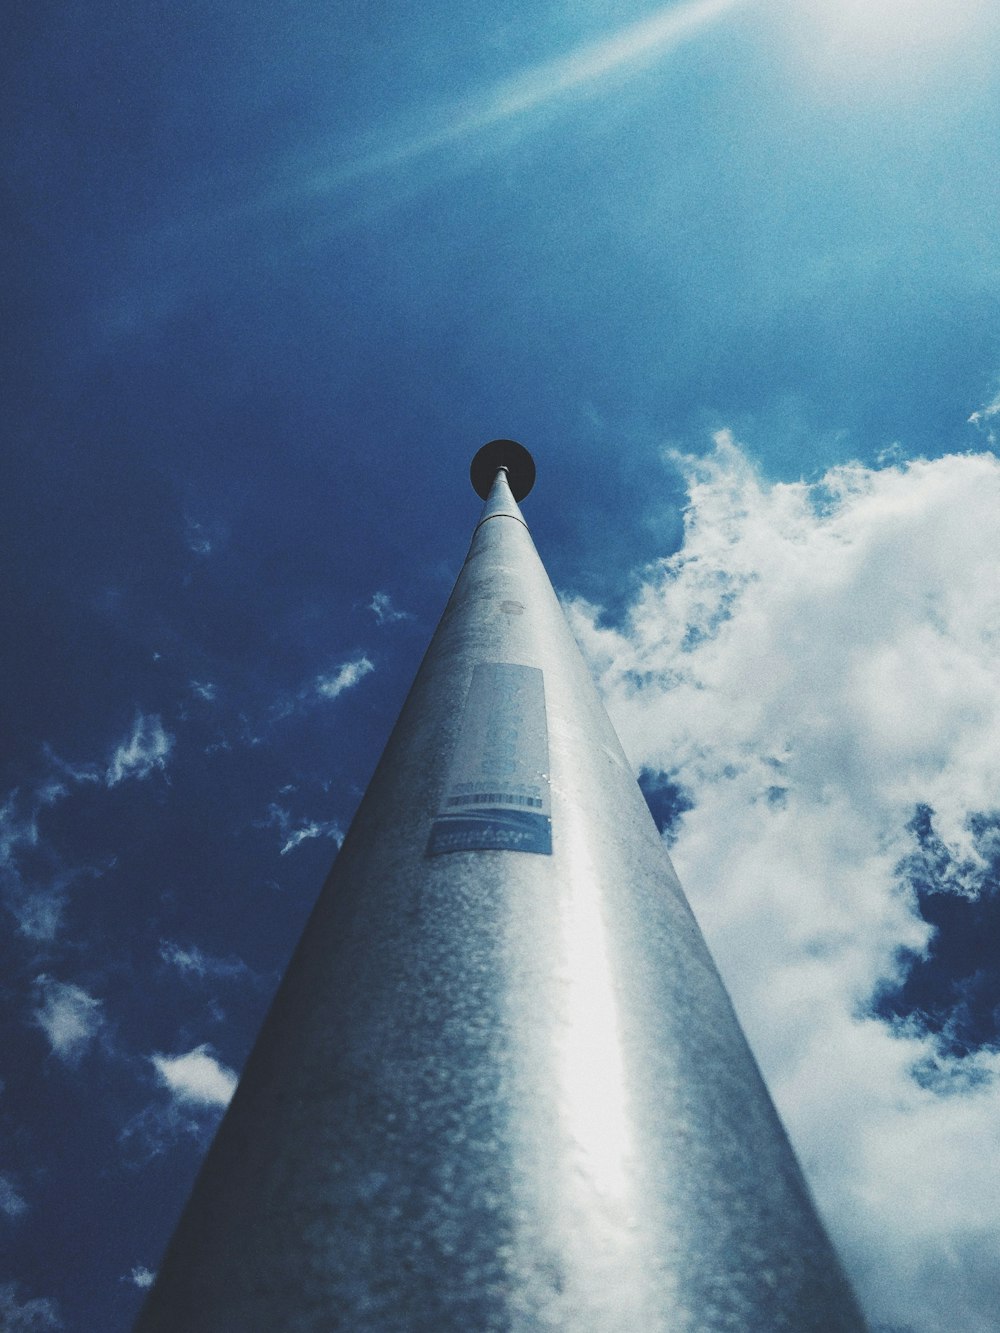 tall grey metal pole under blue and white cloudy sky